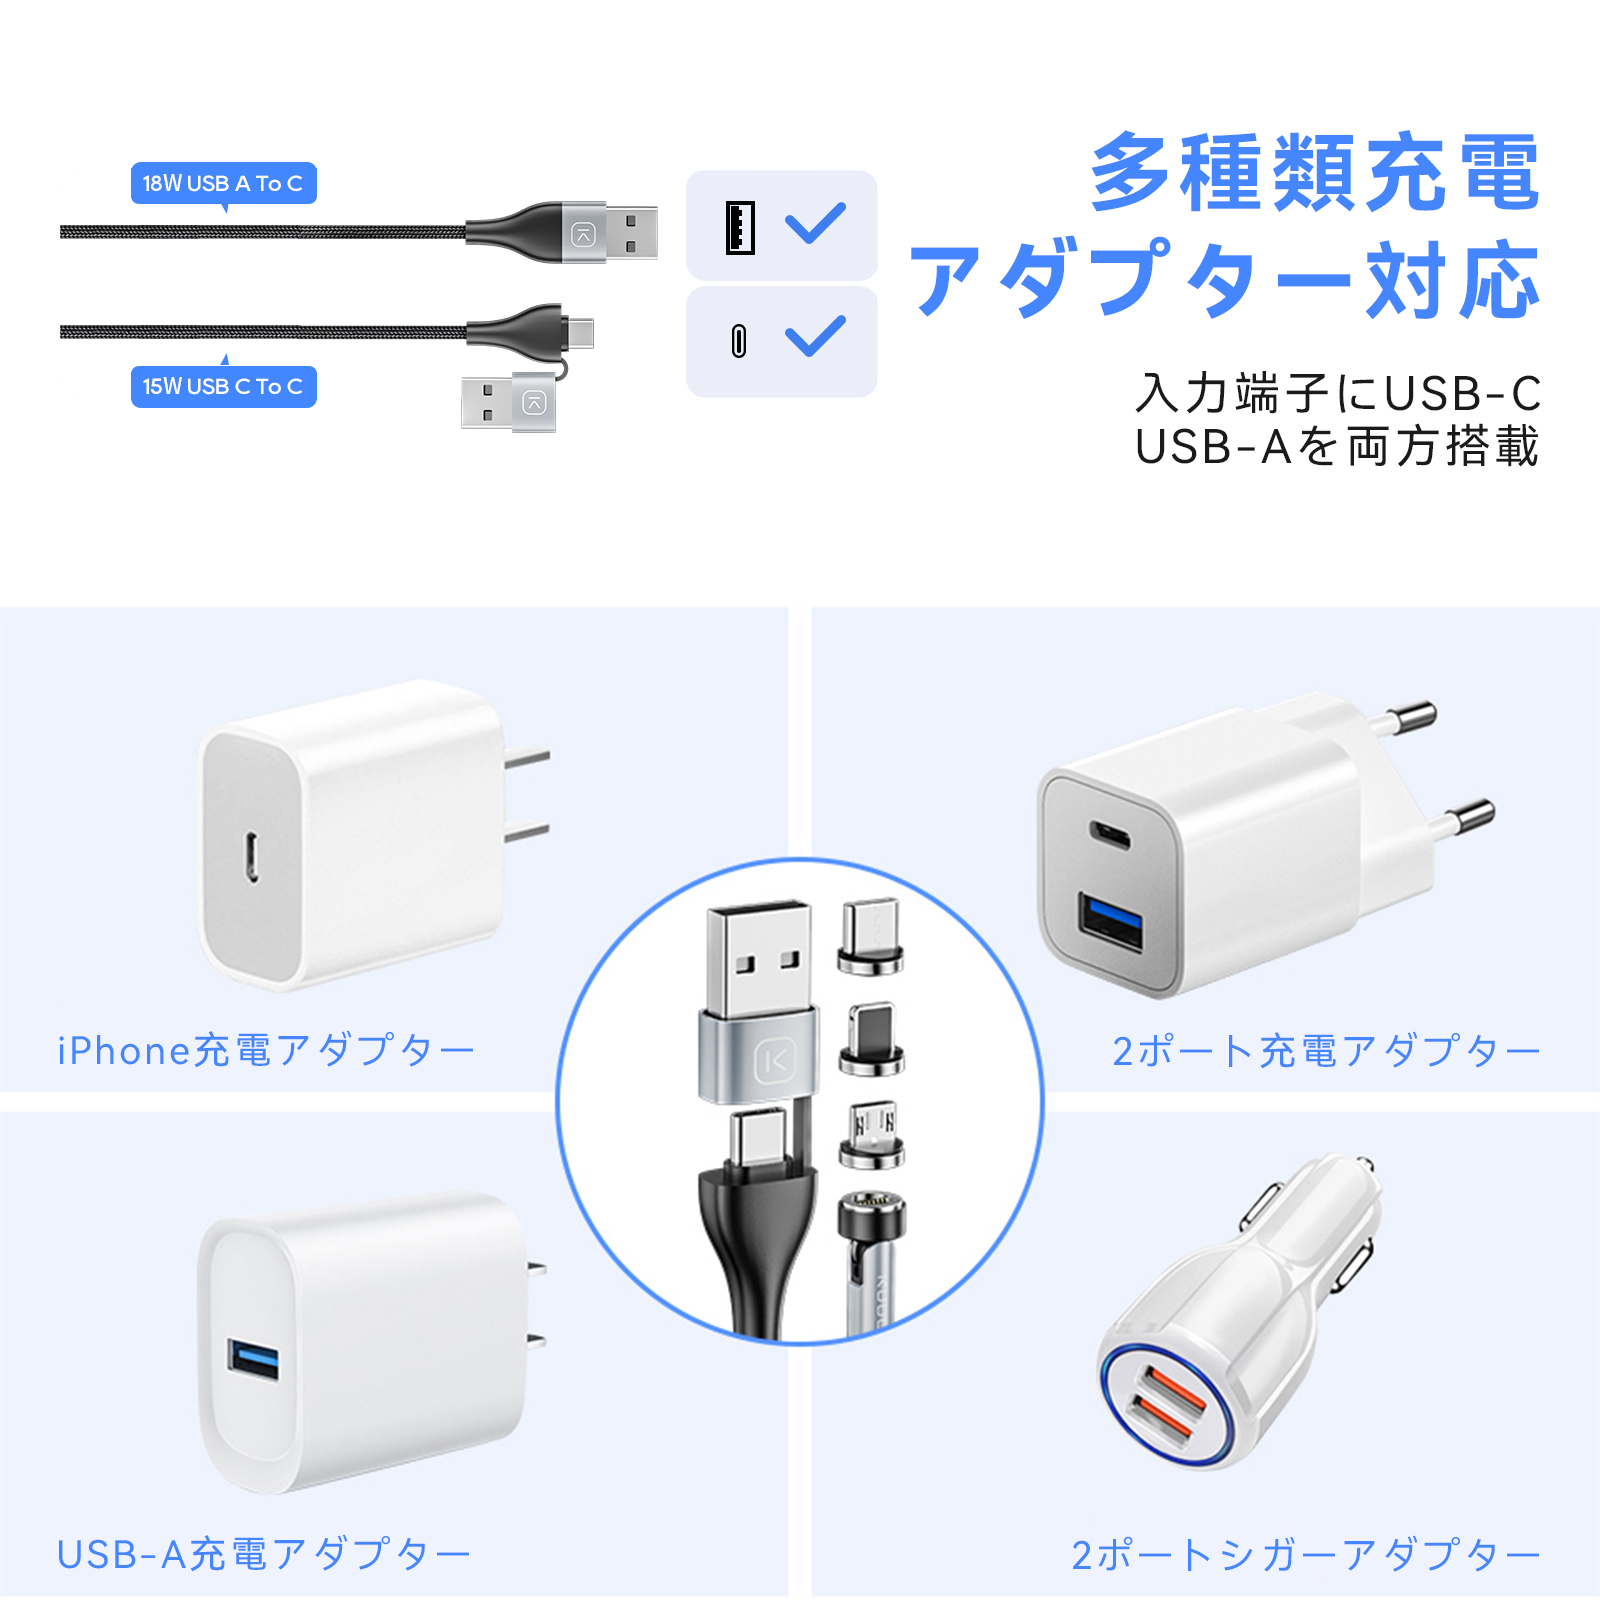  magnet 6in1 charge code 540 times rotation 7 pin 3A sudden speed charge data communication magnet lightning Type-C iPhone charger charge cable one hand operation Android